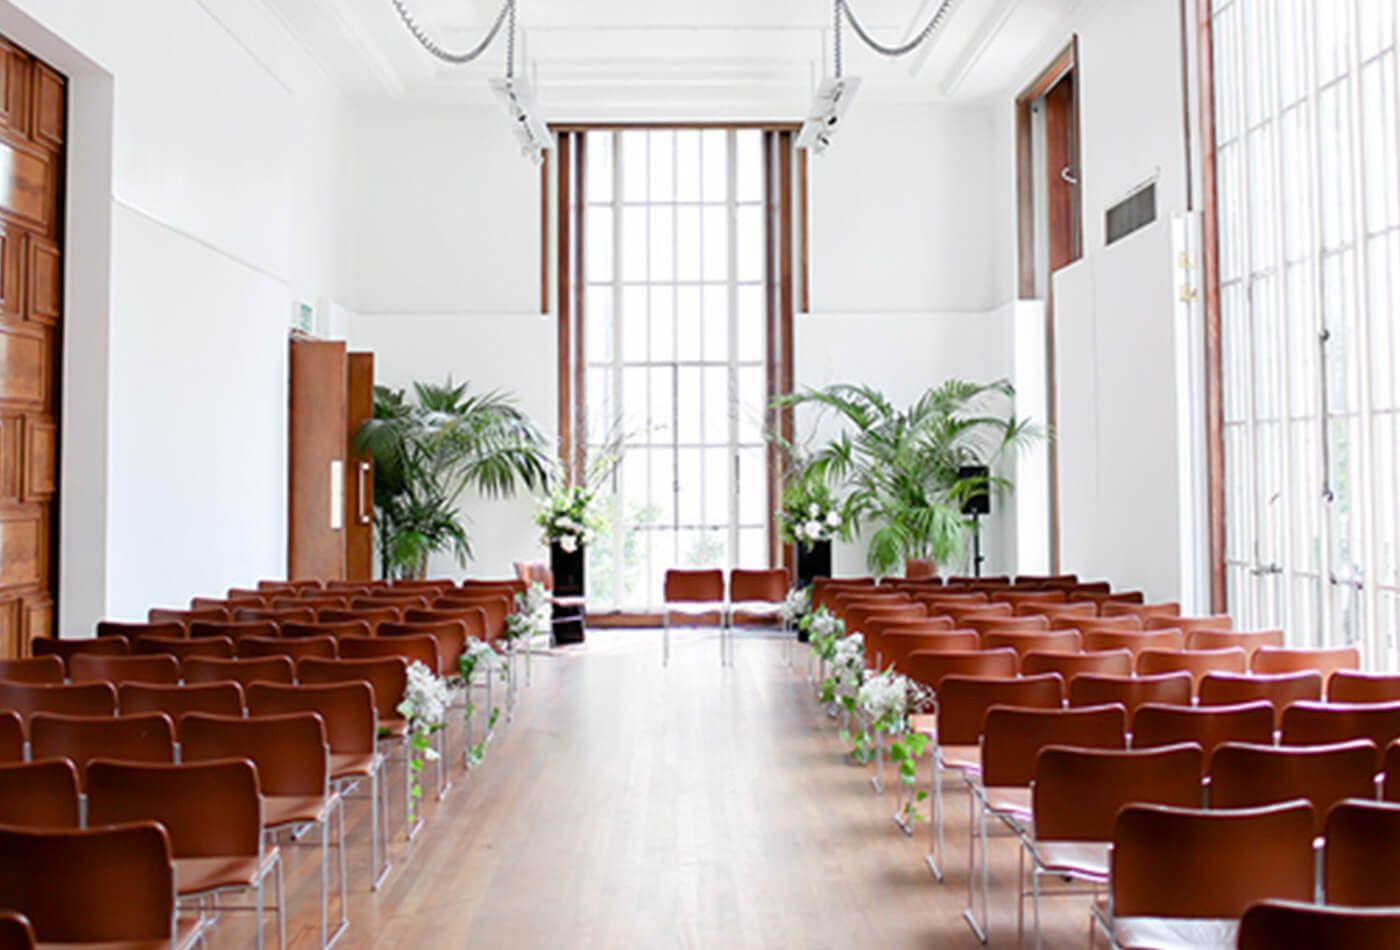 Conference room with brown leather chairs and tall plants